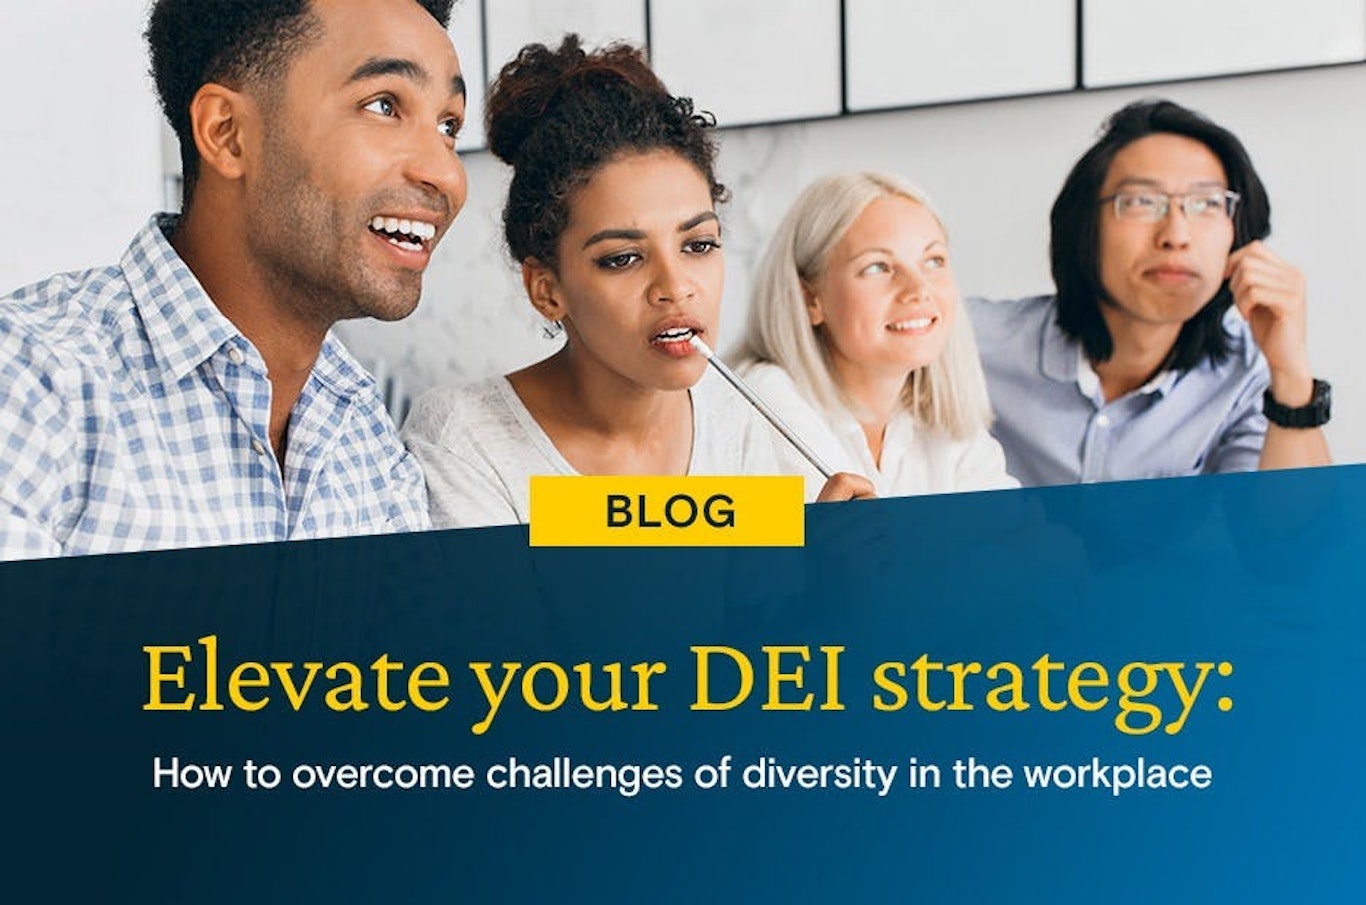 challenges of diversity in the workplace